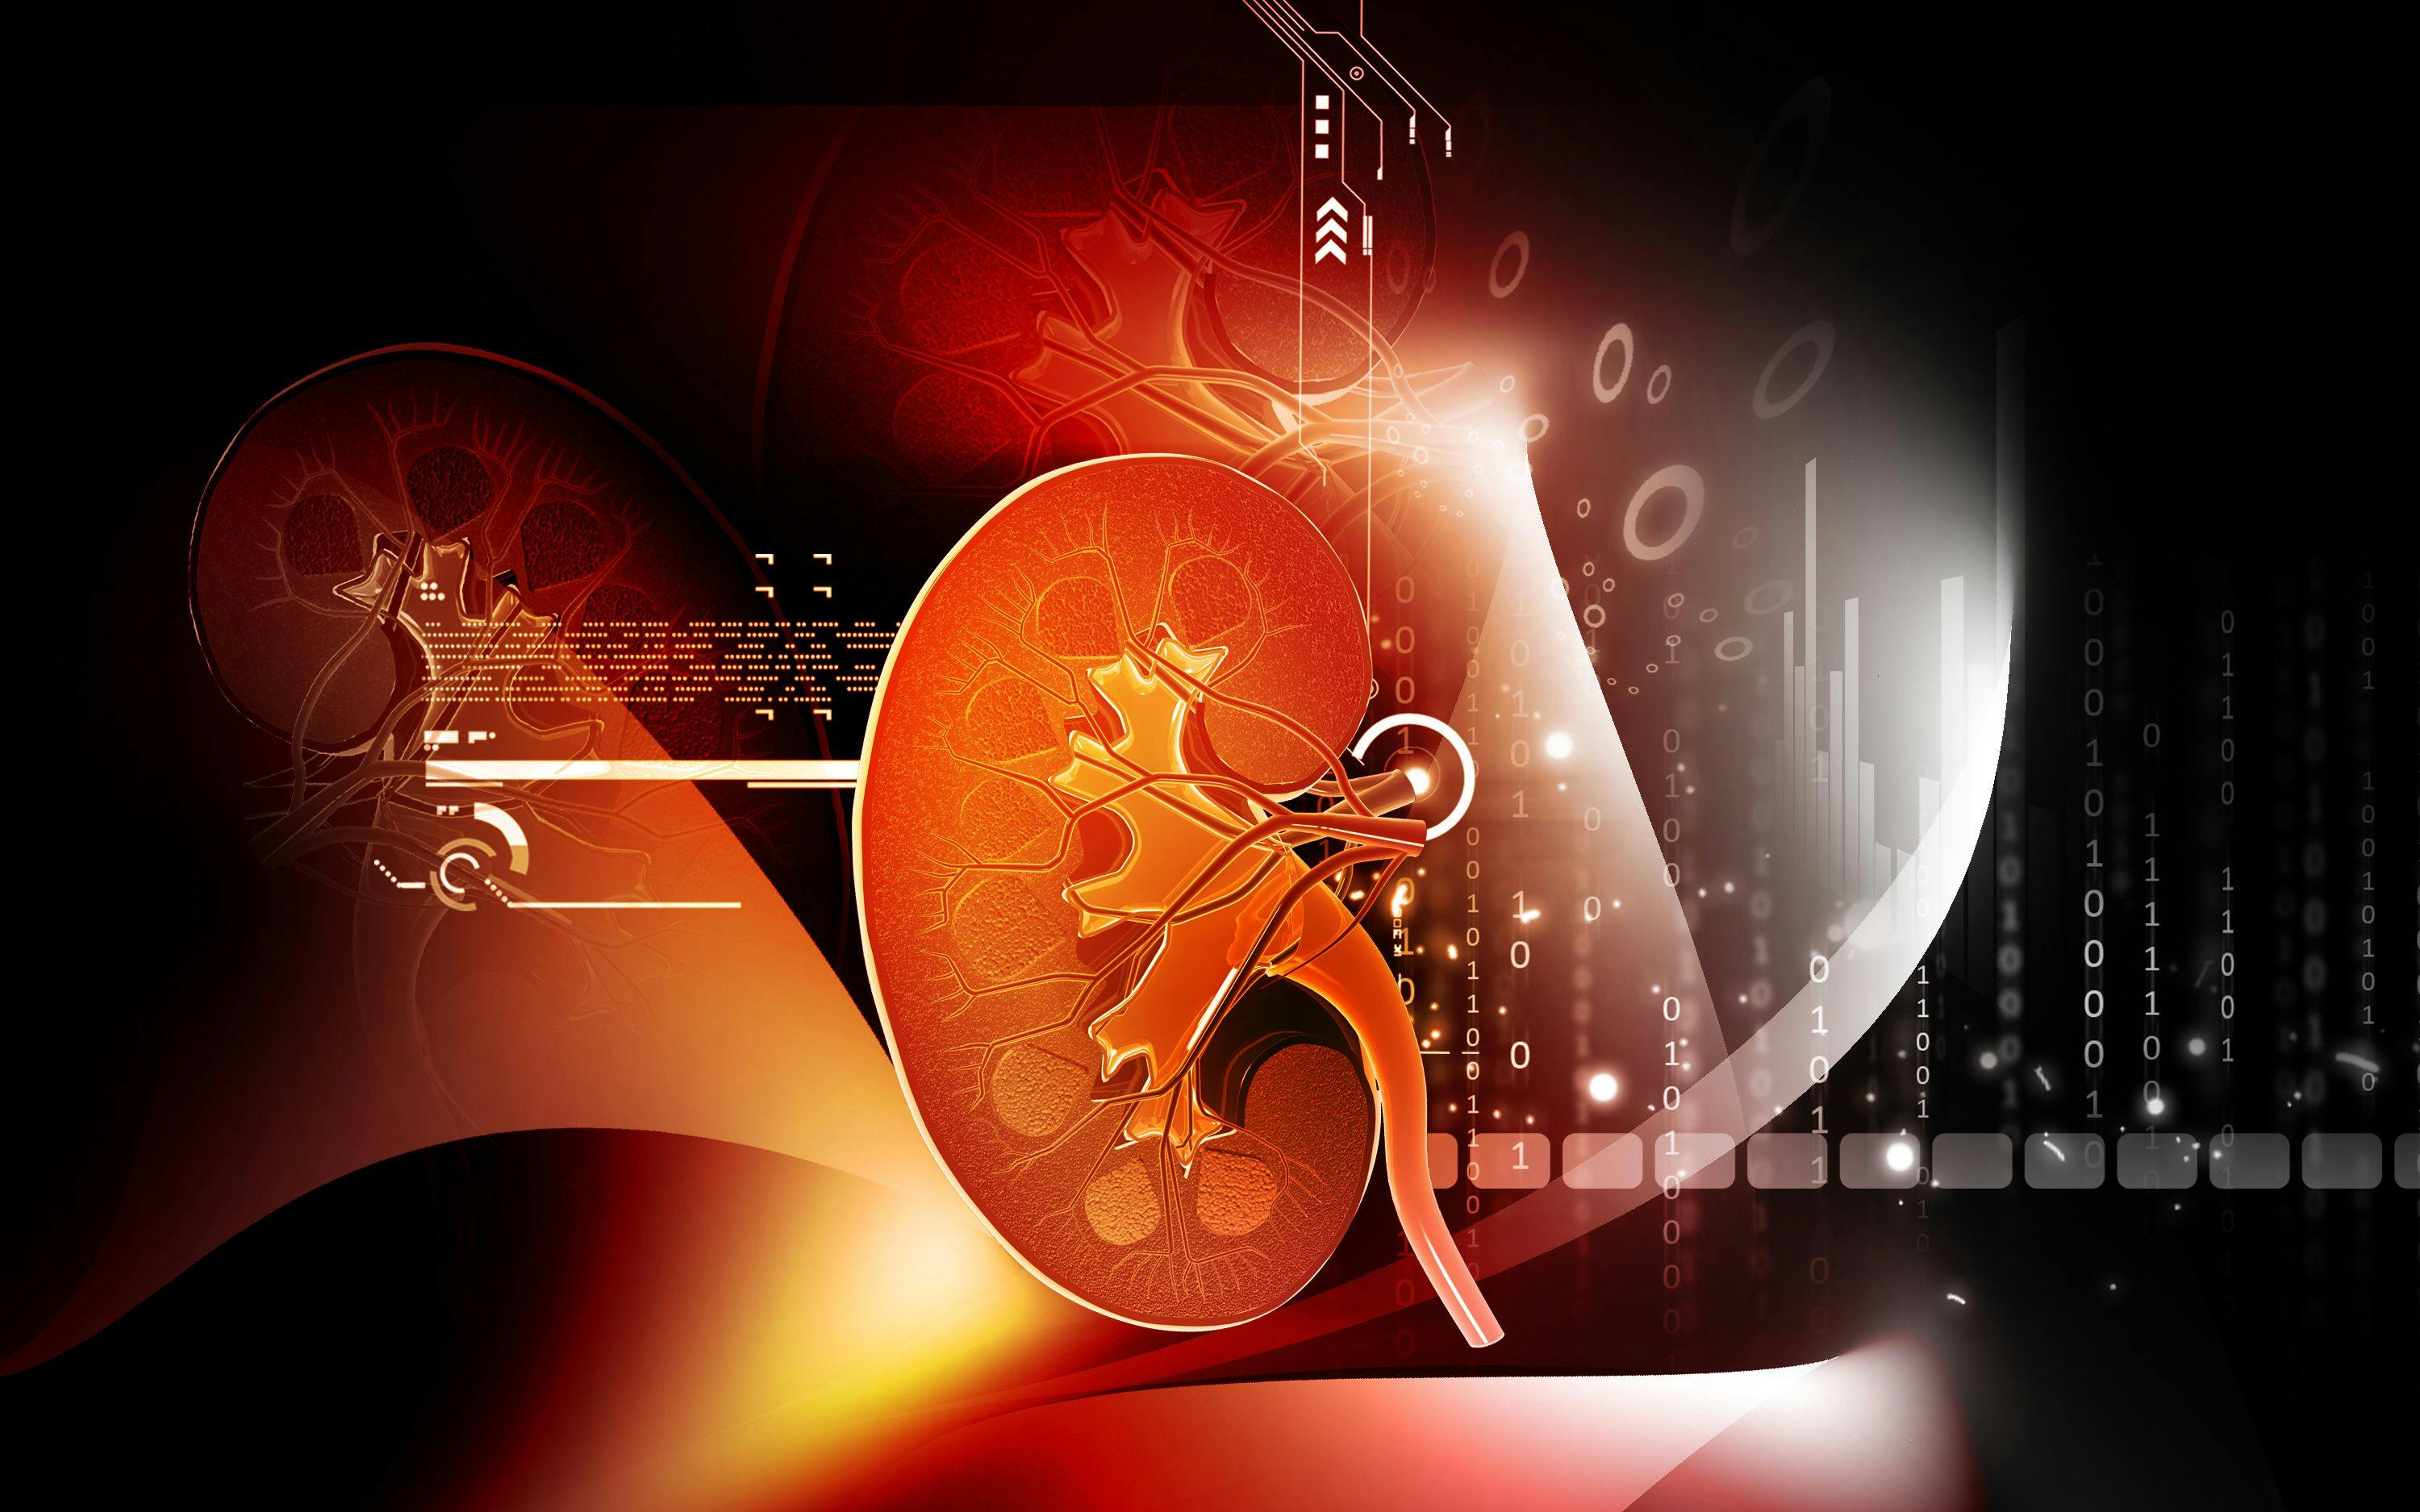 image of a kidney surrounded by computer data